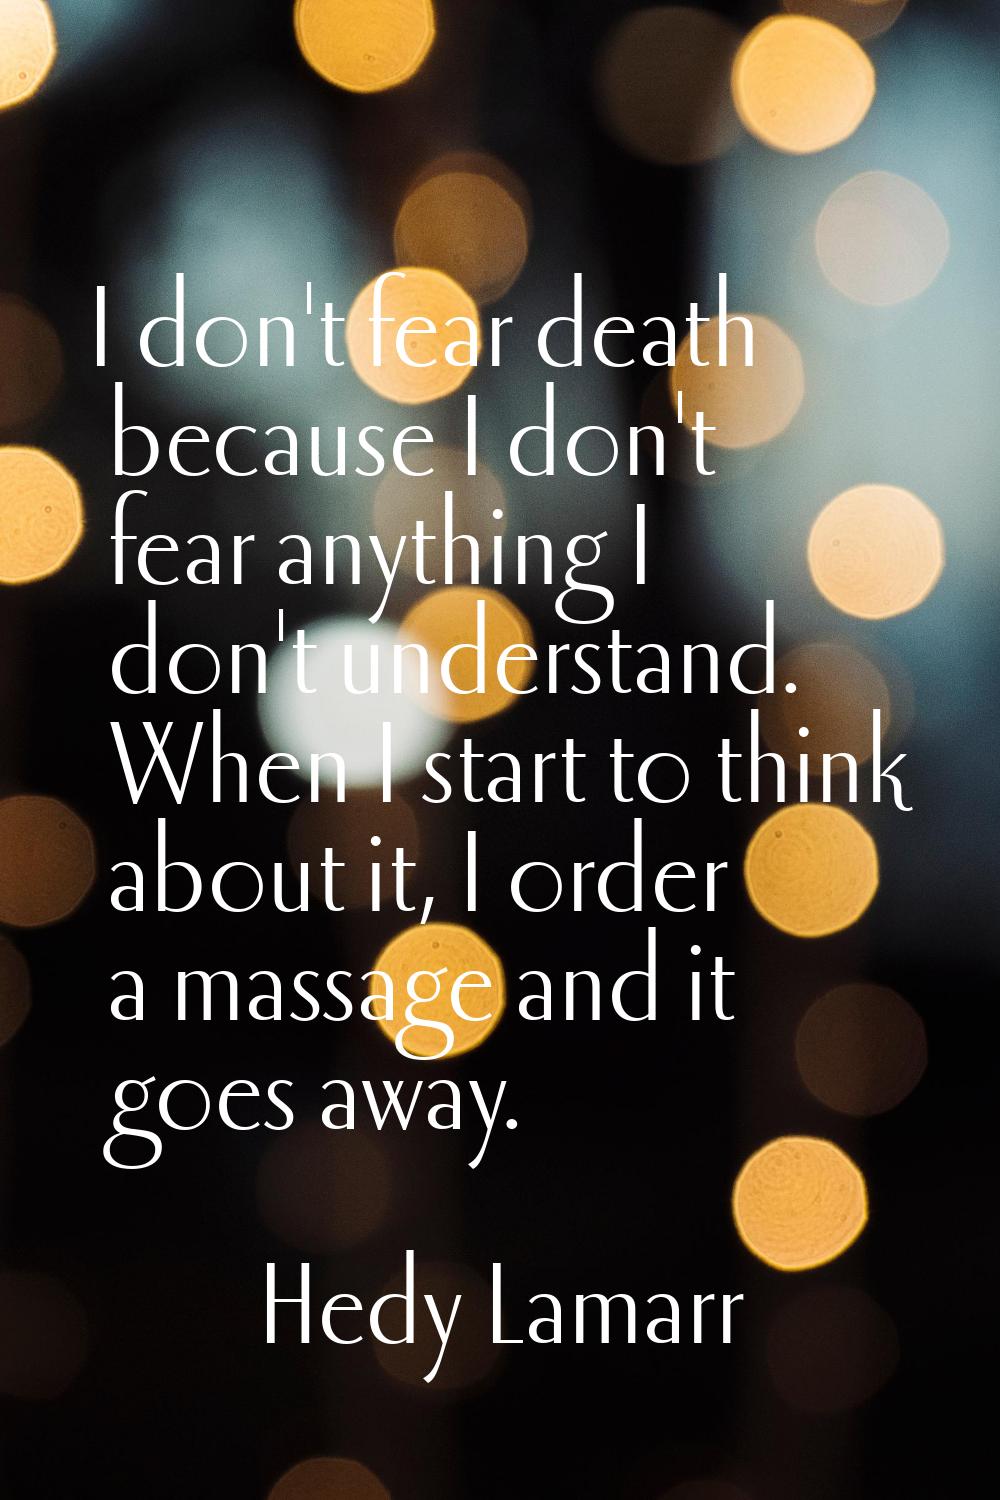 I don't fear death because I don't fear anything I don't understand. When I start to think about it